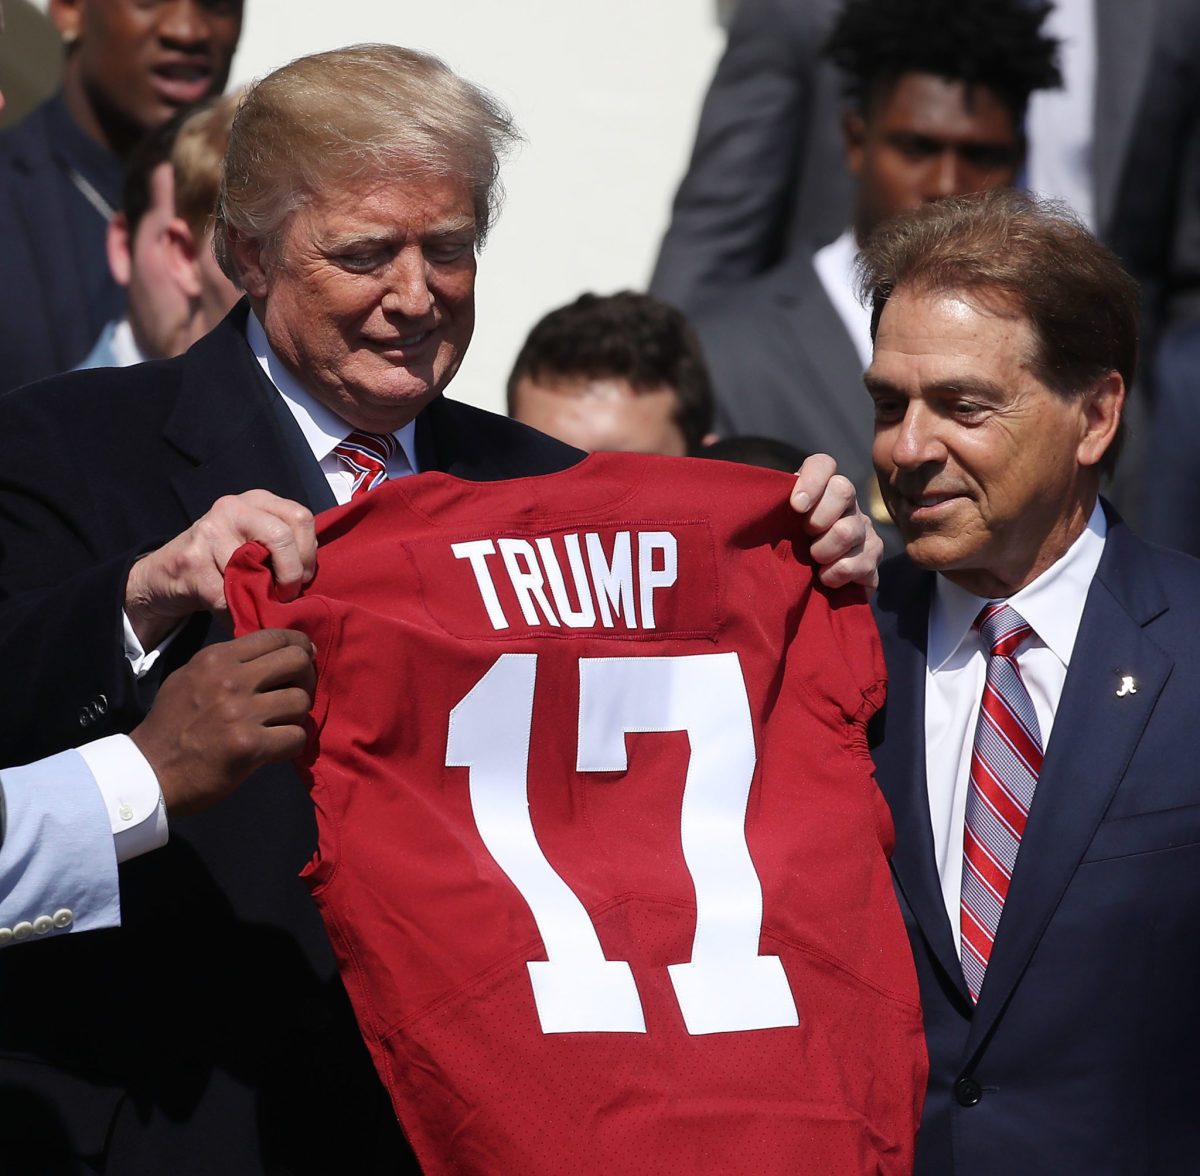 U.S. President Donald Trump stands with coach Nick Saban (R), while presented with a team jersey while honoring the 2017 NCAA Football National Champion Alabama Crimson Tide.